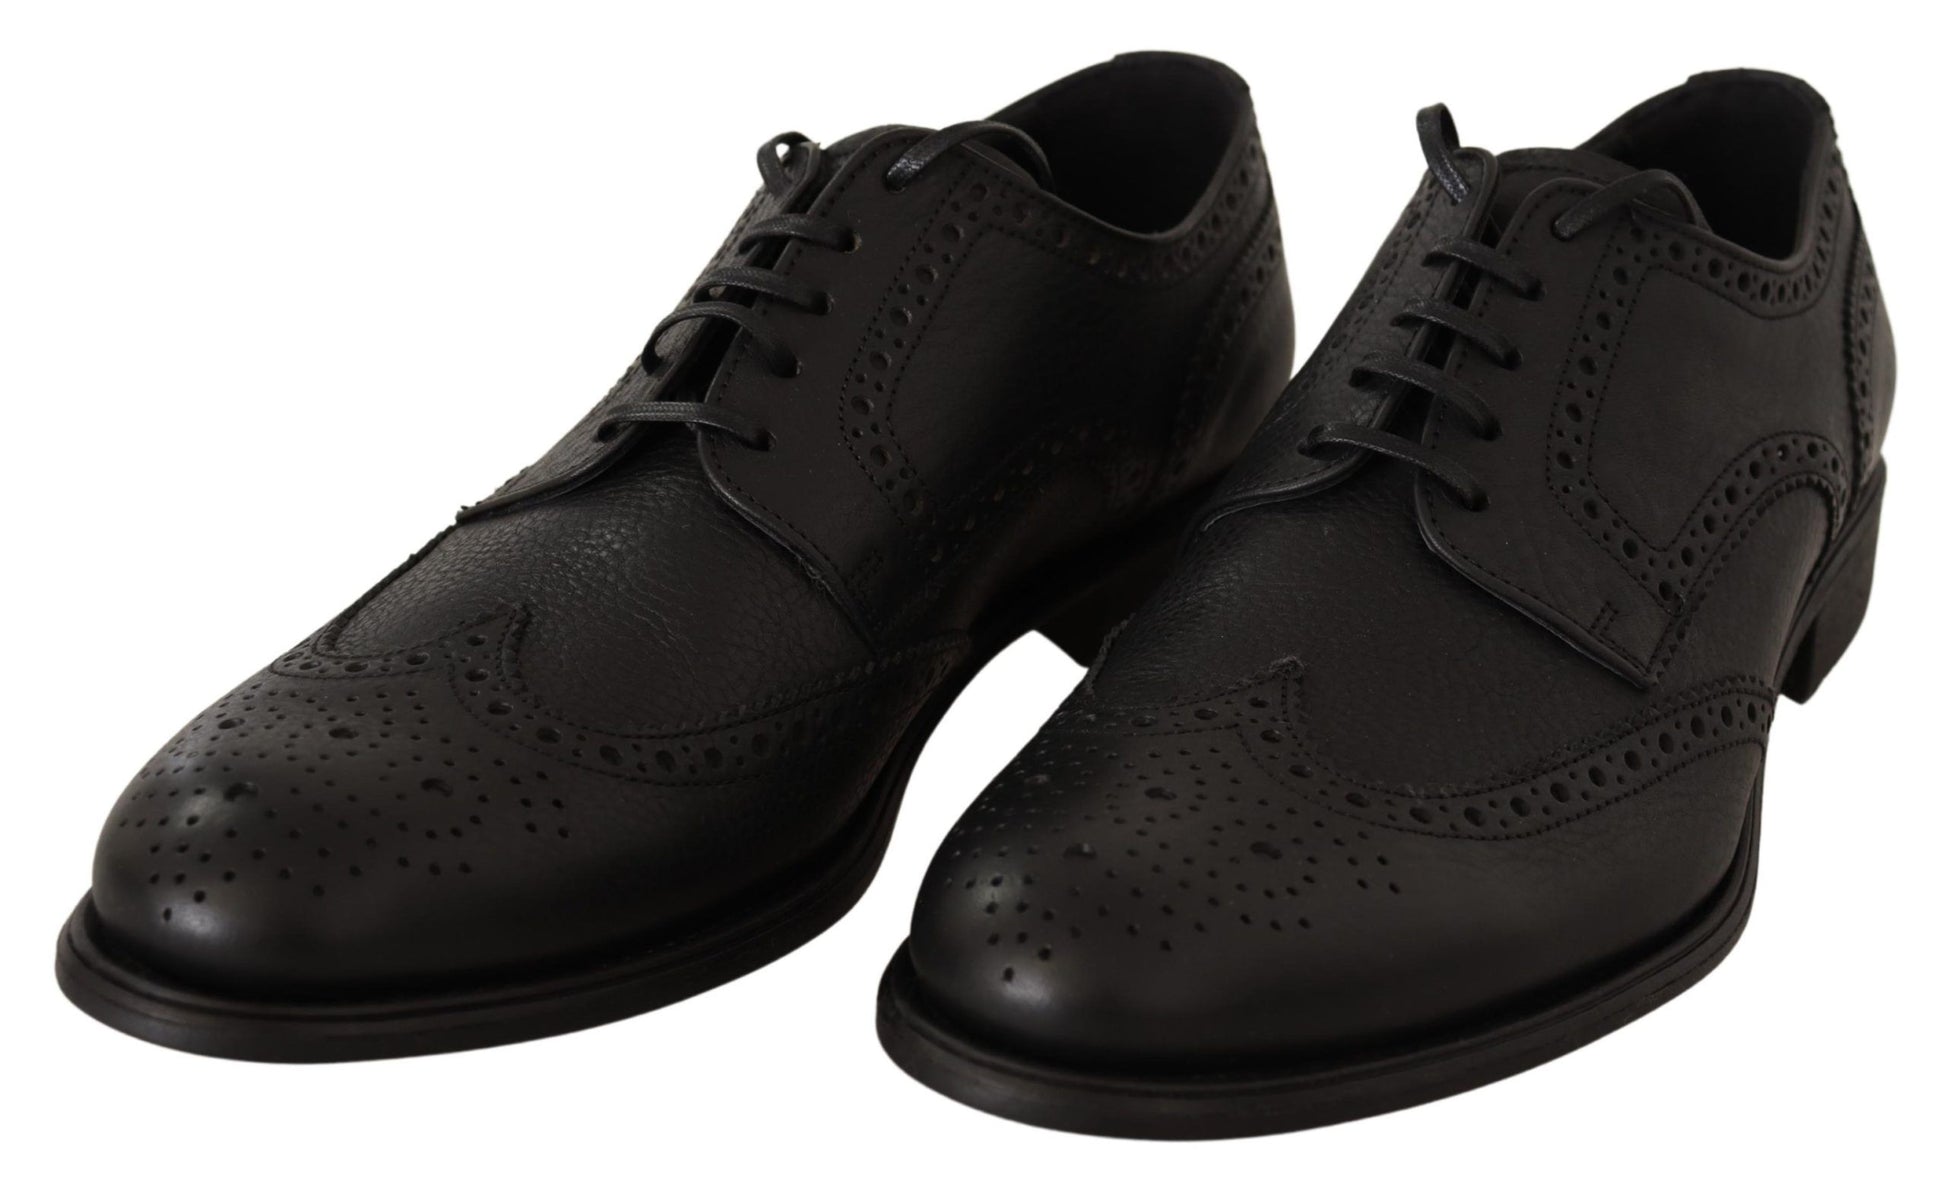 Black Leather Oxford Wingtip Formal Dress Shoes - Designed by Dolce & Gabbana Available to Buy at a Discounted Price on Moon Behind The Hill Online Designer Discount Store